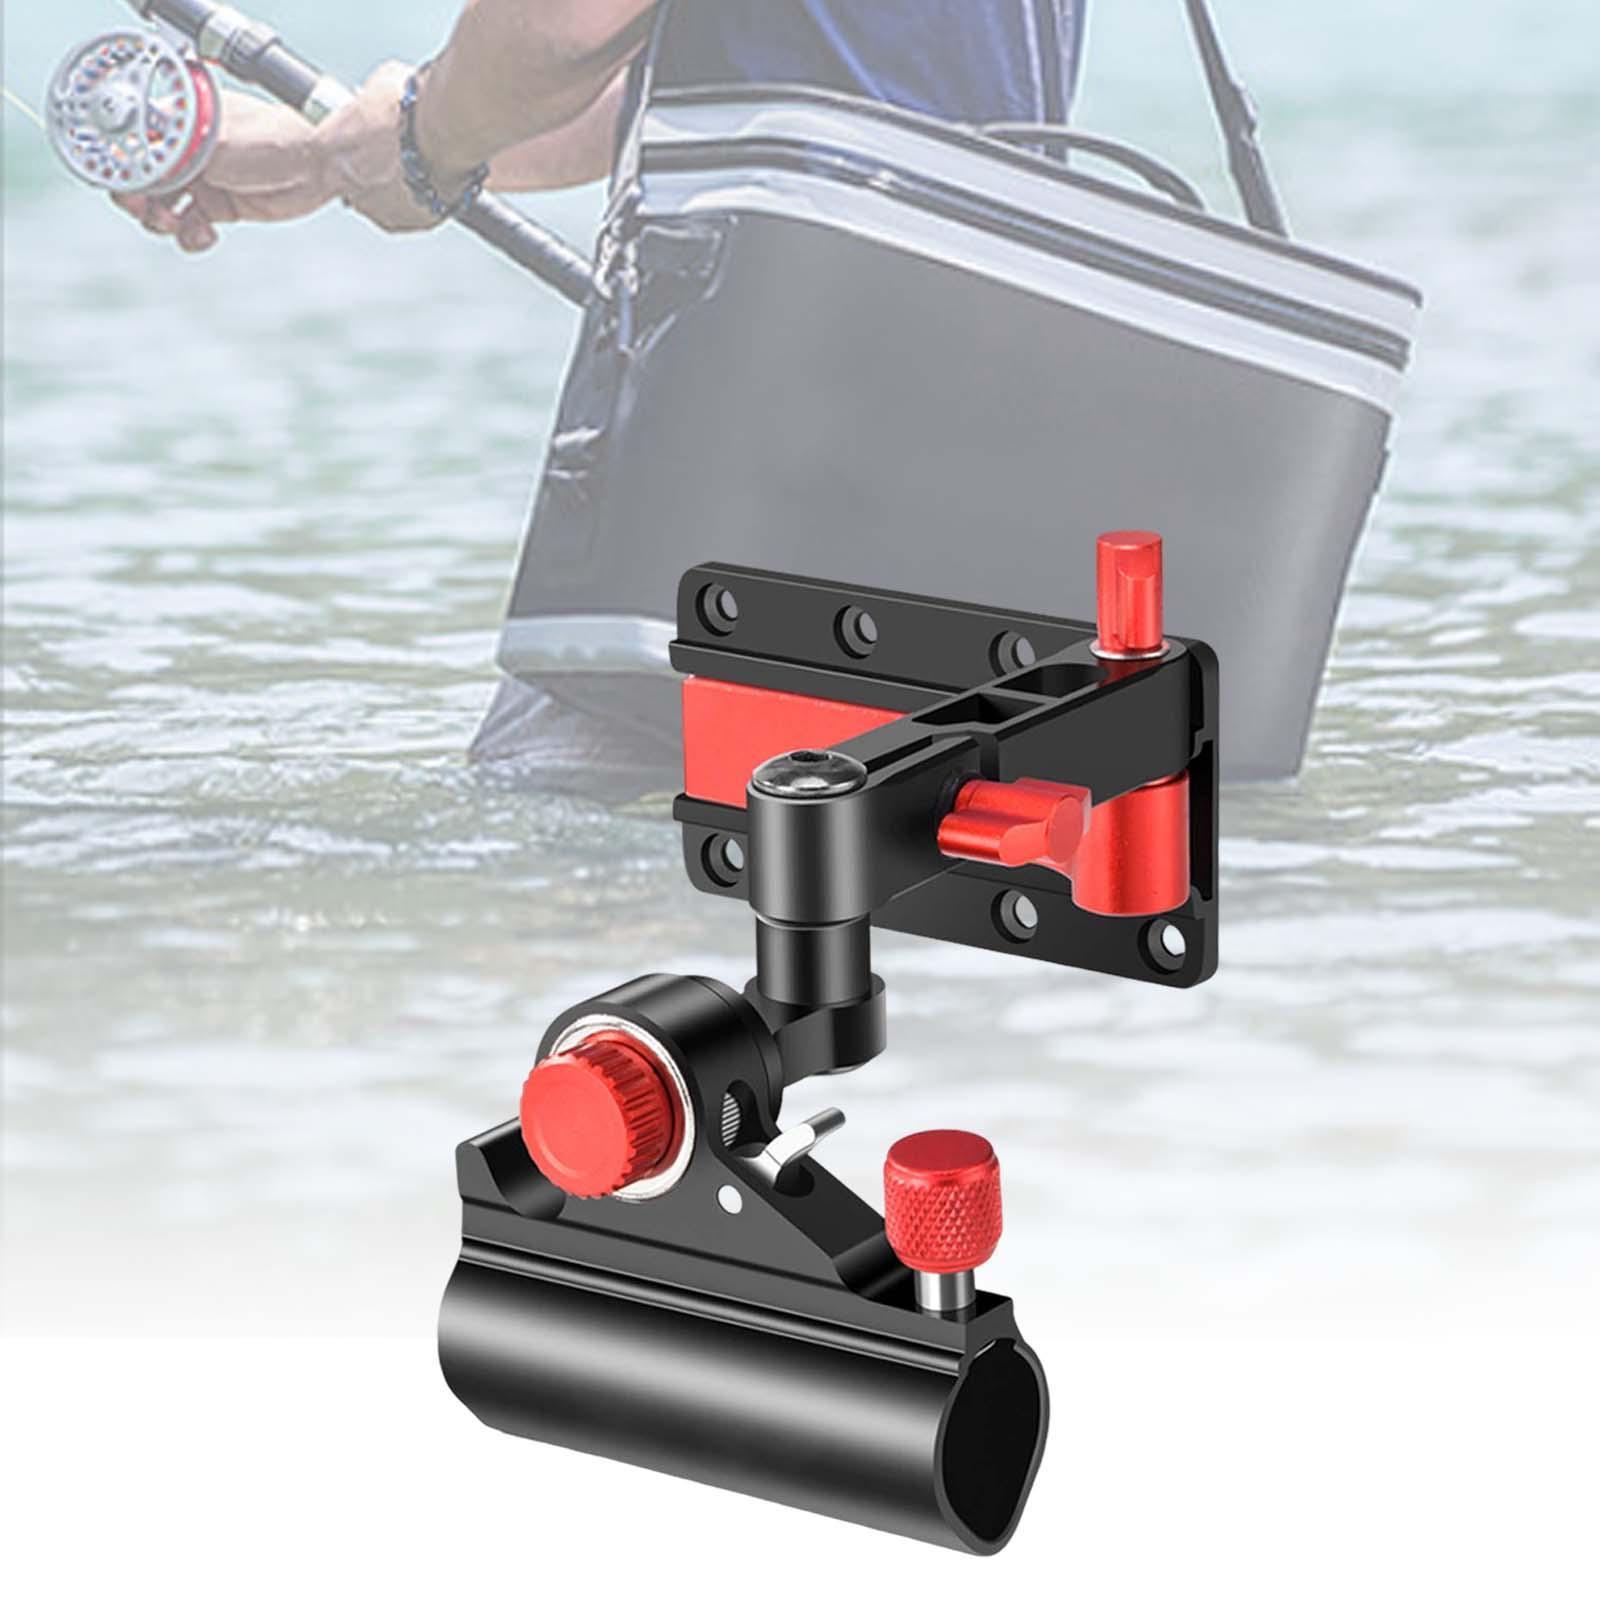 Rod Holder Easy to Use Accessories Portable Mount Adjustable for Fishing Box